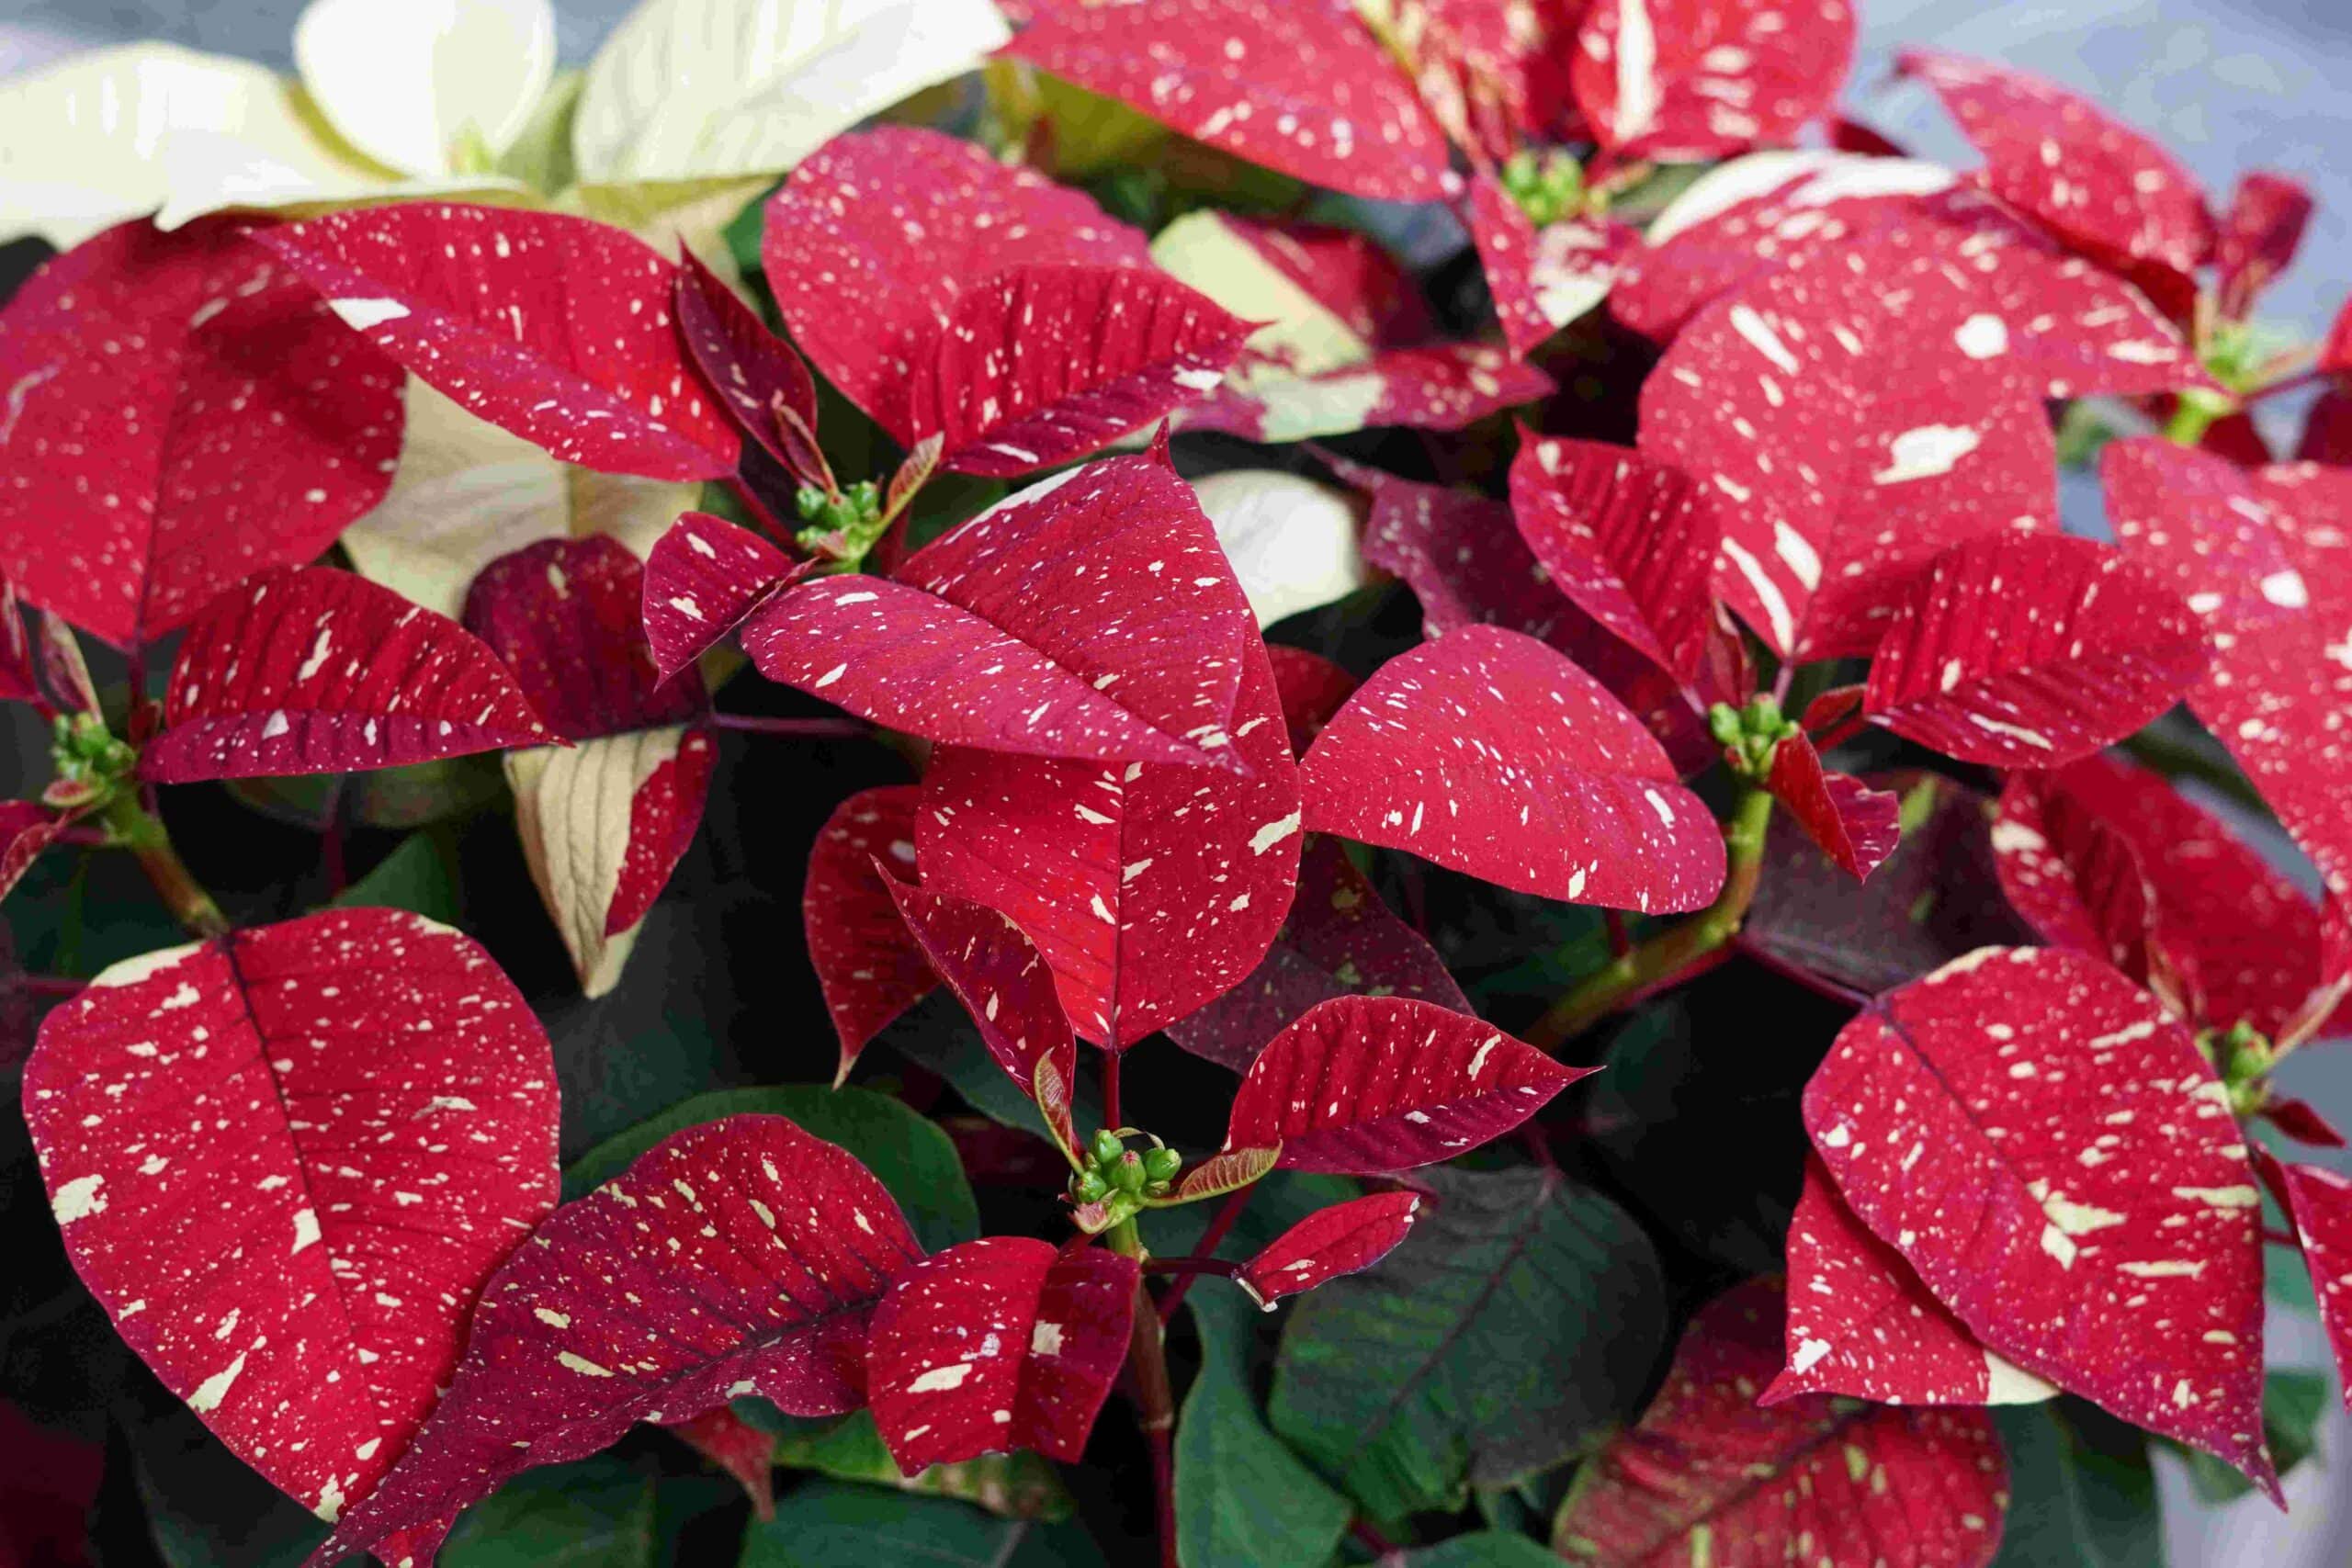 Wide-view photo of the striking variegated foliage of the 'Superba New Glitter' poinsettia. 'Superba New Glitter' poinsettias are a variegated variation of the traditional red & green leafed poinsettia.